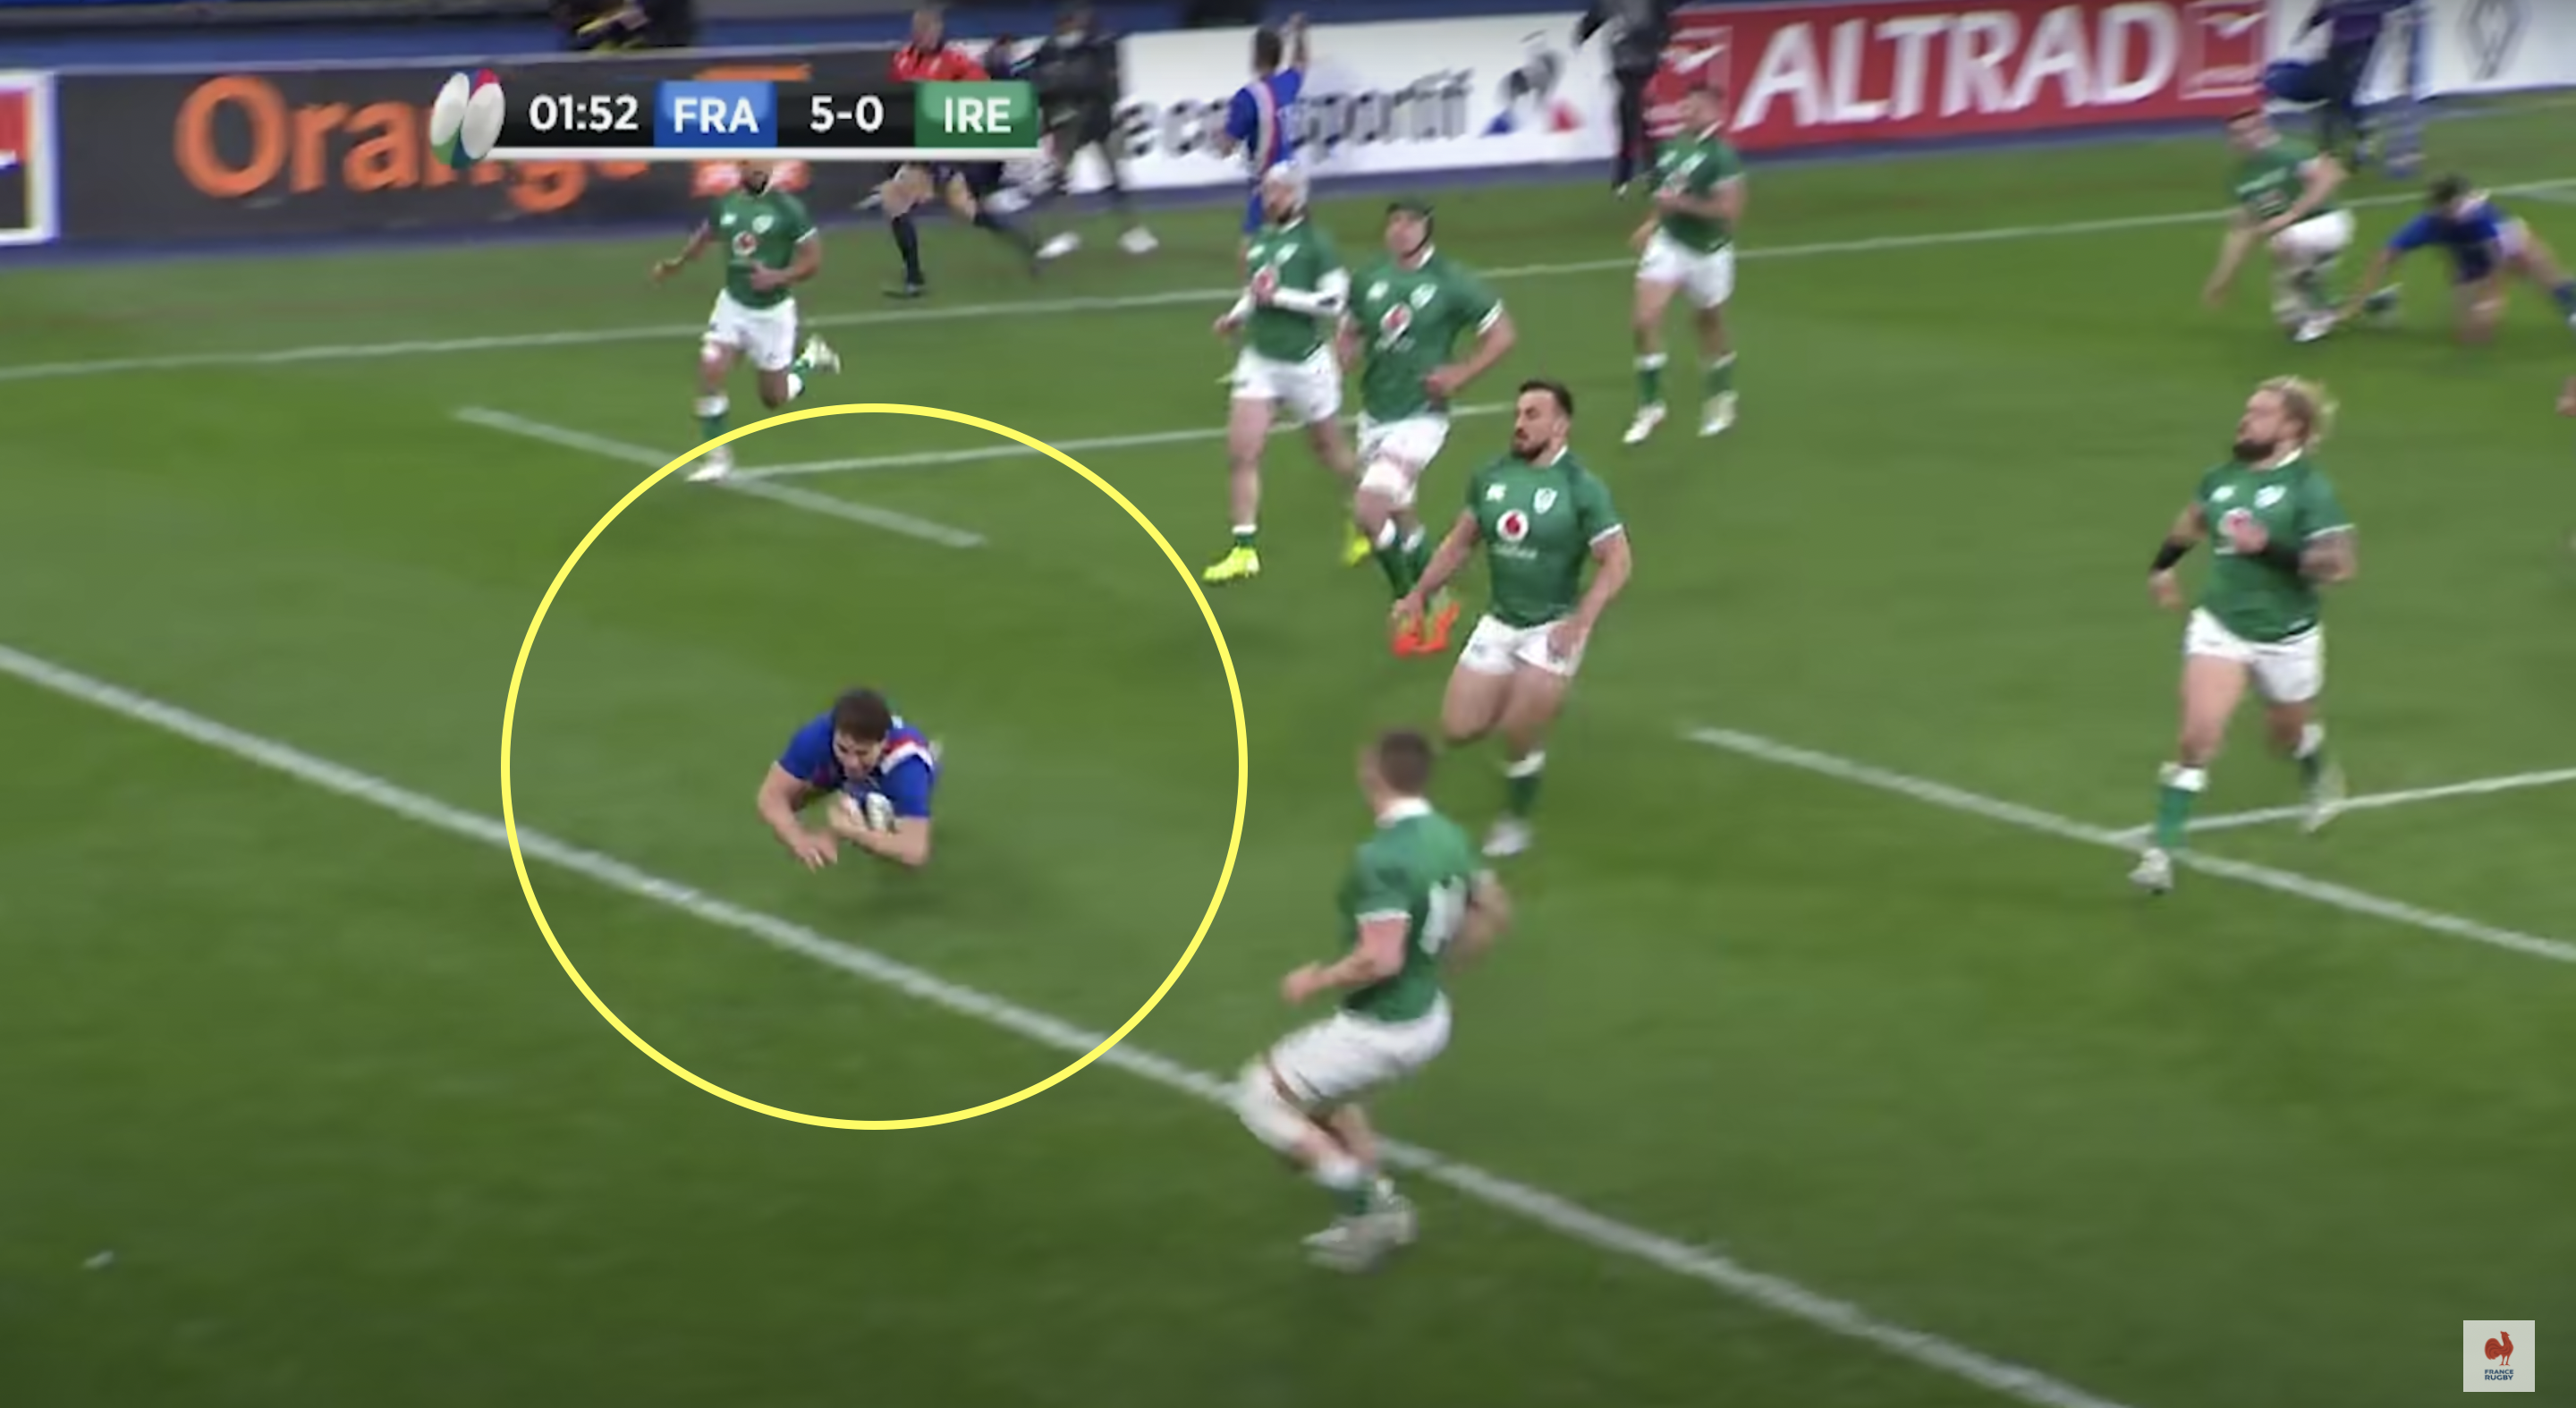 New angle of France's acclaimed try leaves Ireland fans seething